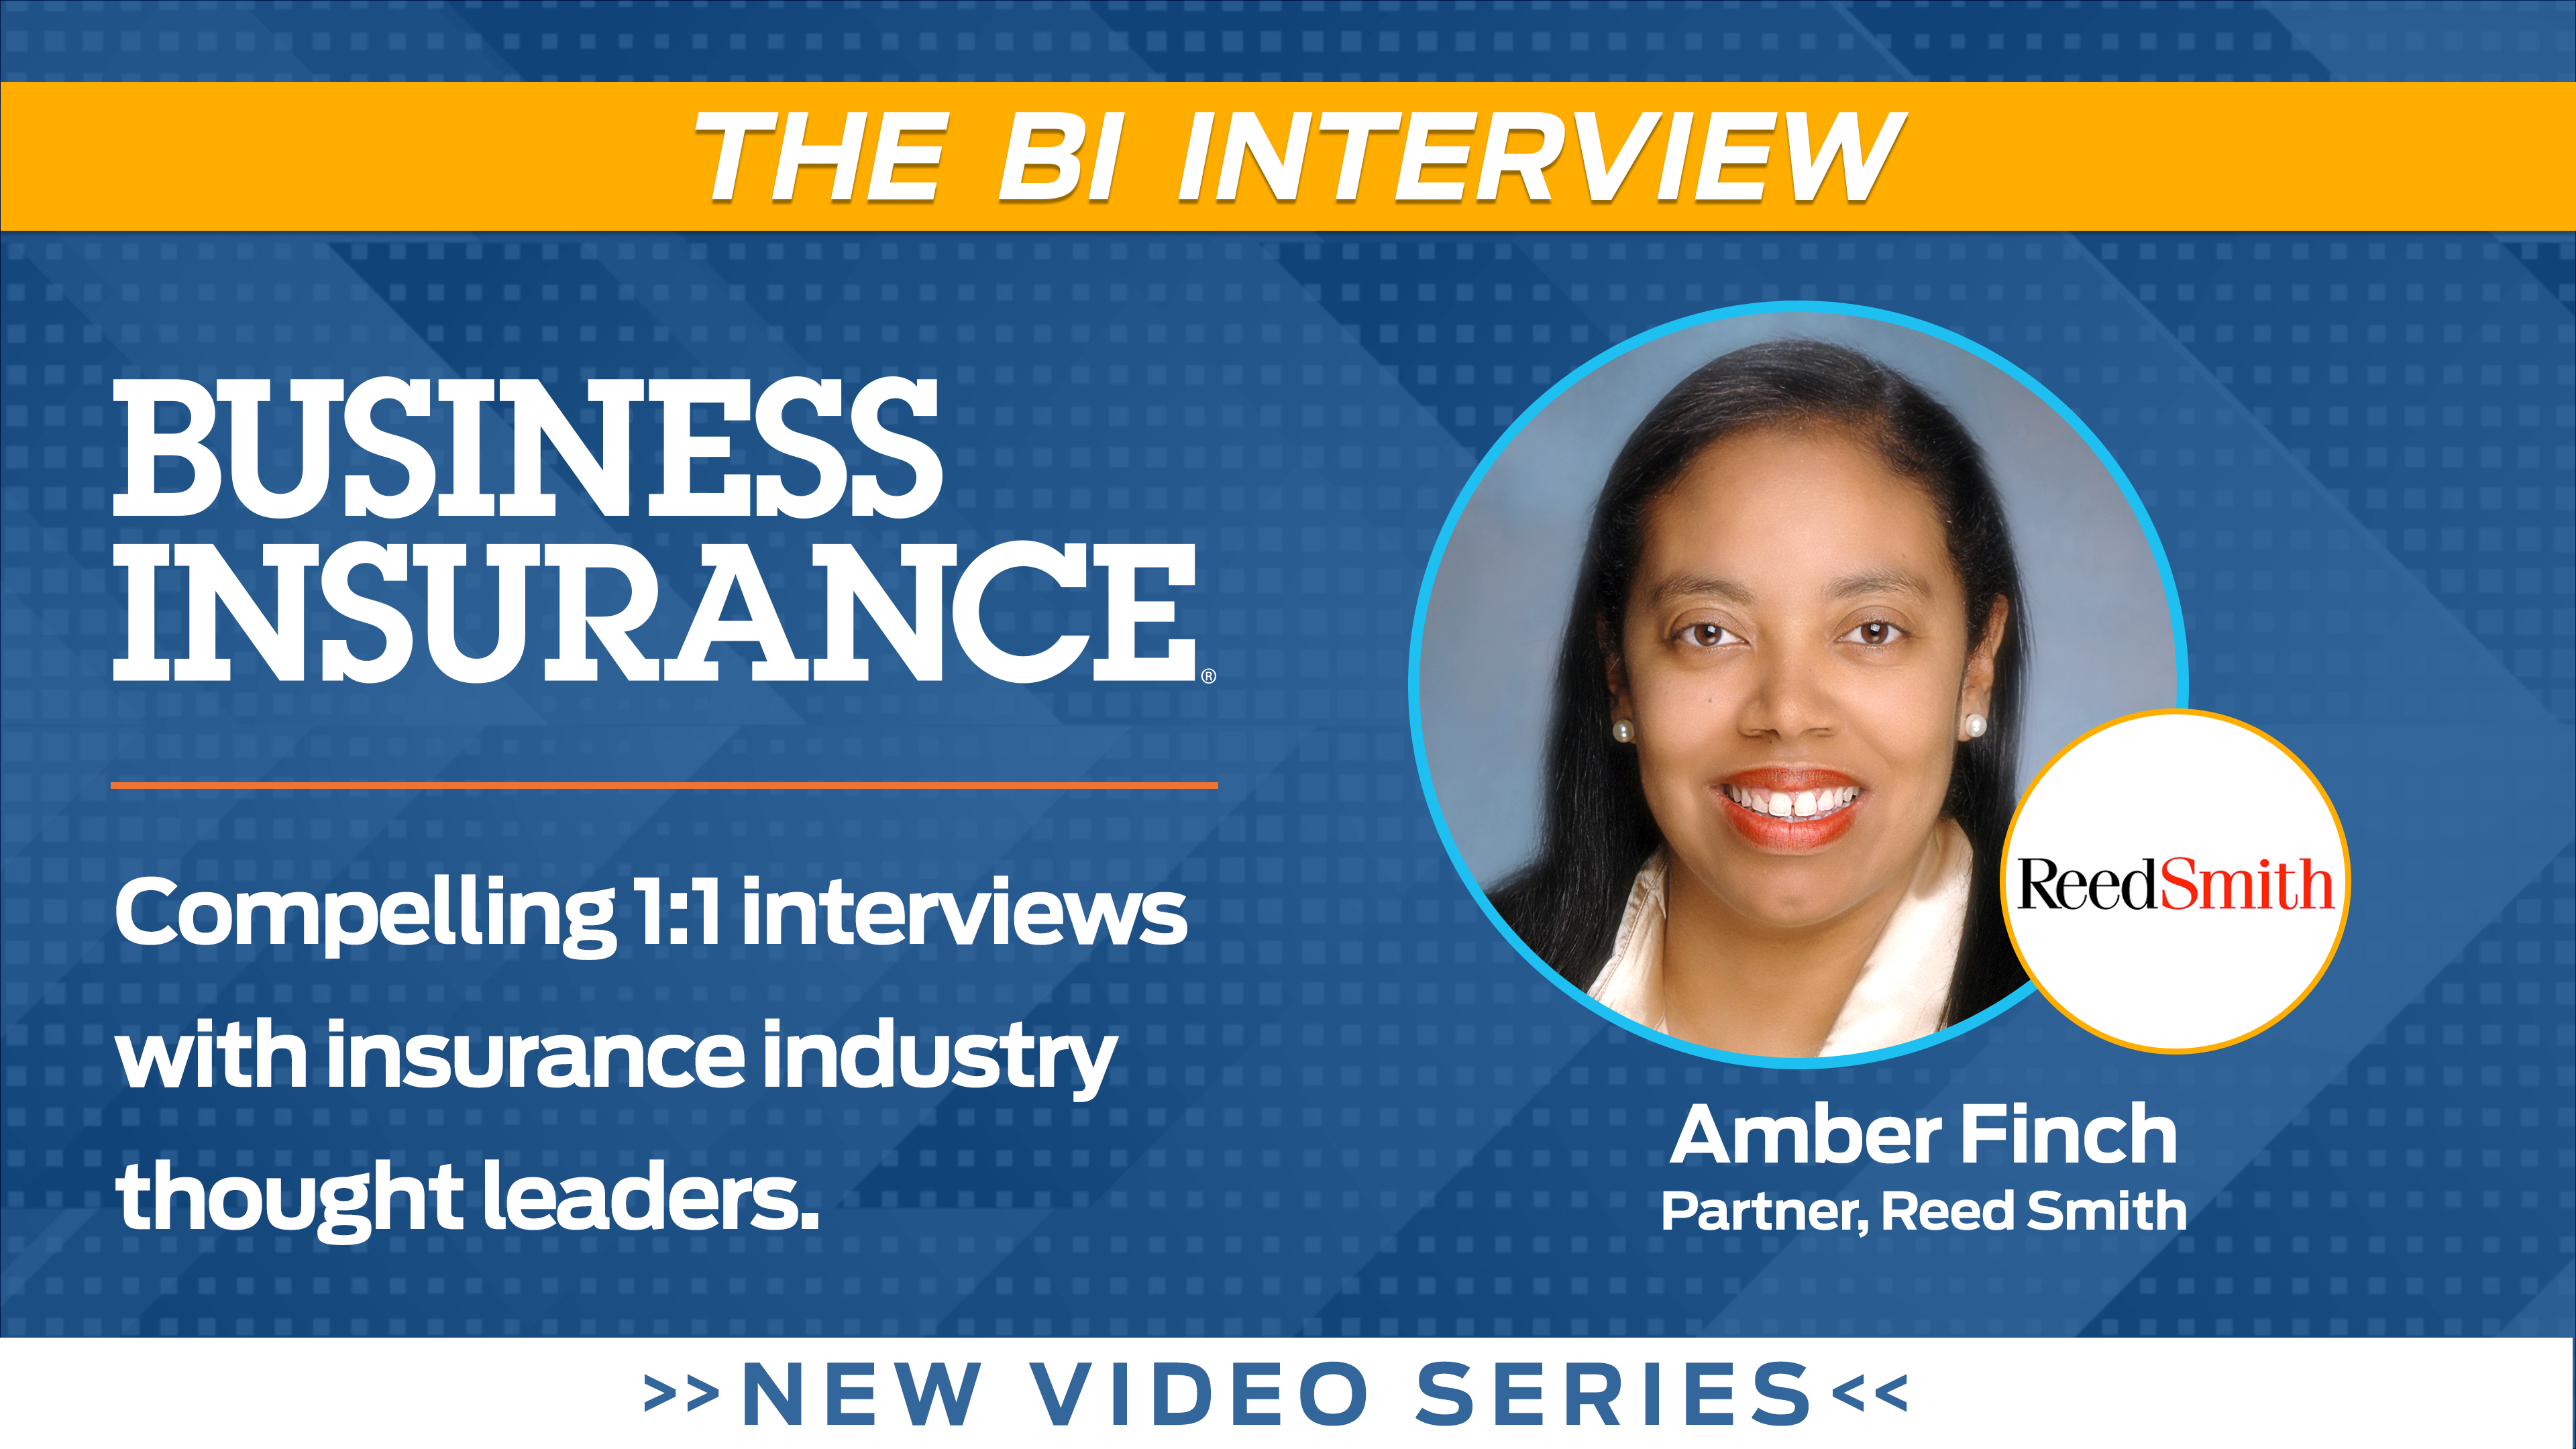 Video: The BI Interview with Amber Finch, Reed Smith